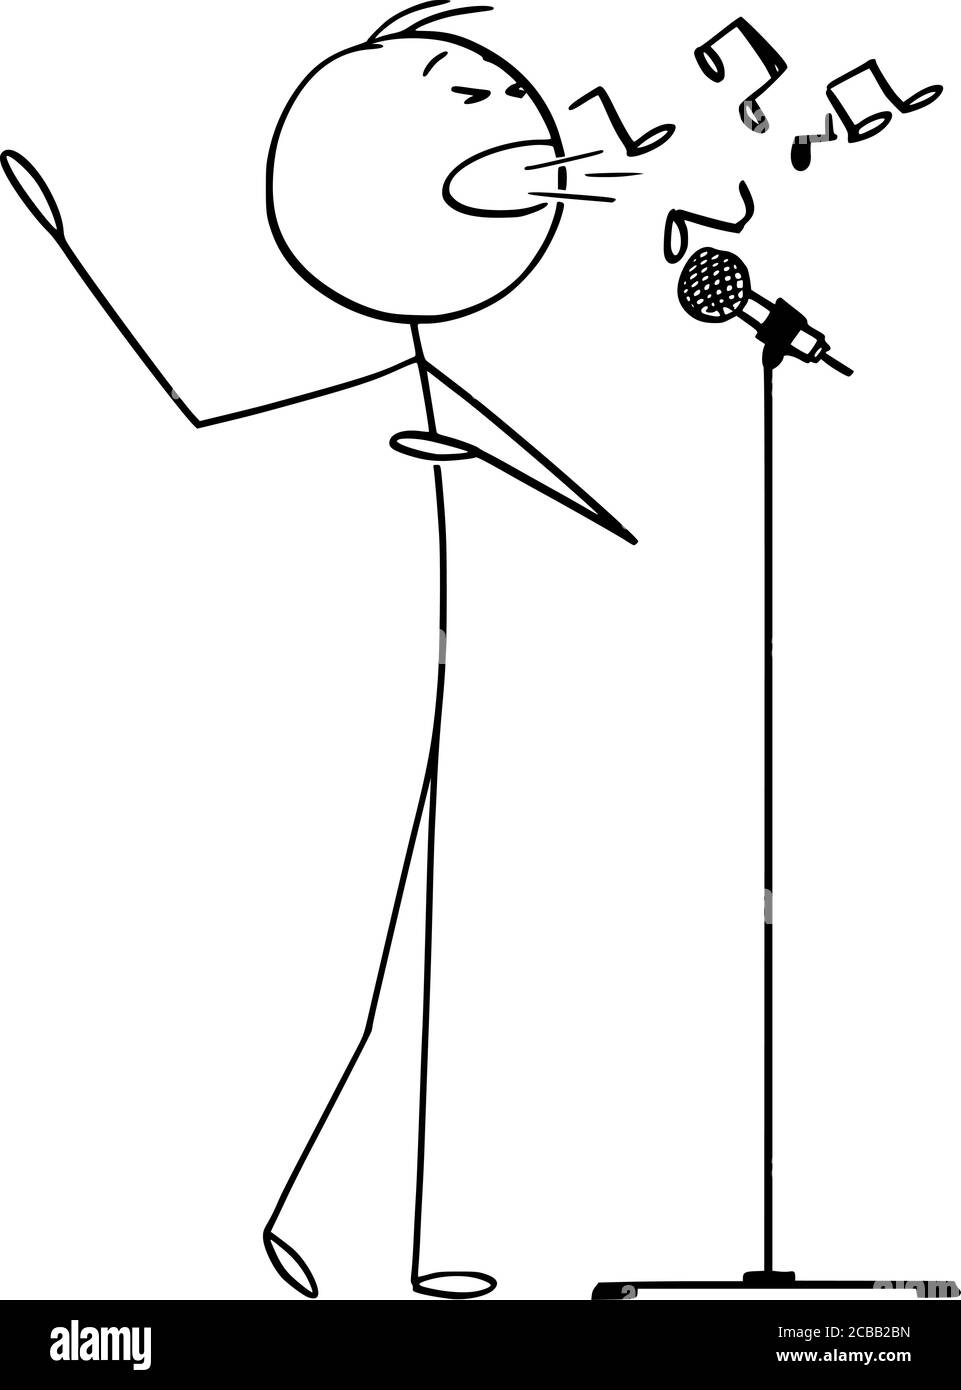 Vector cartoon stick figure drawing conceptual illustration of man or singer singing song on stage to microphone and creating music. Stock Vector